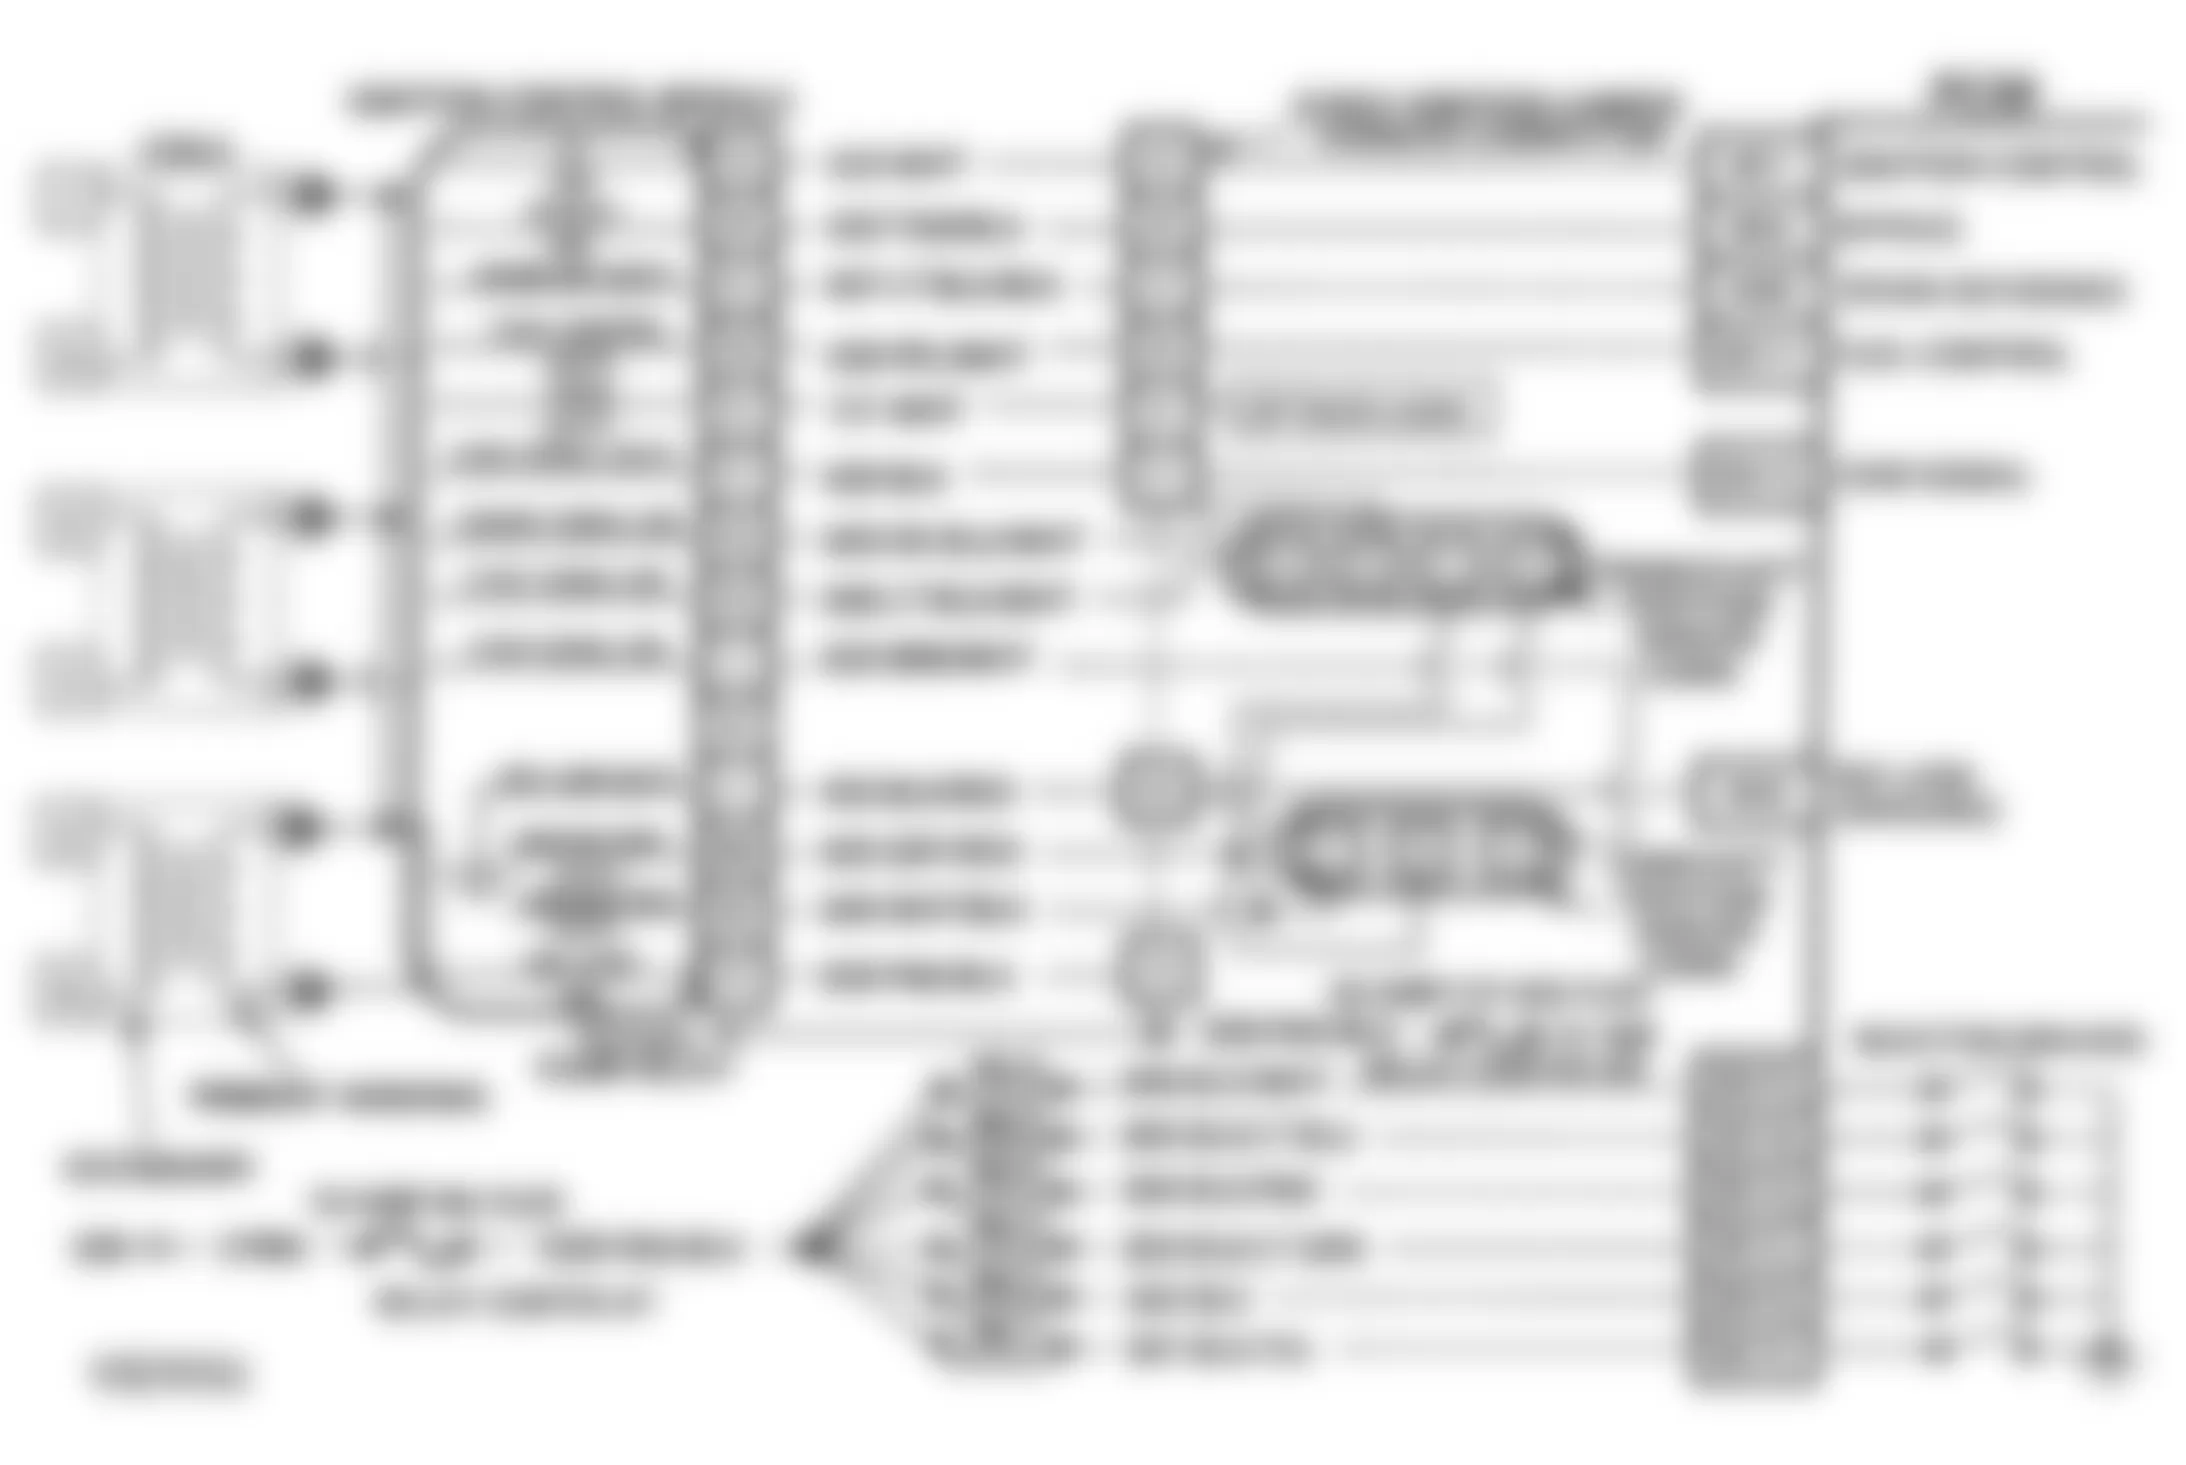 Buick Riviera 1993 - Component Locations -  Code 42 Schematic (3.8L (VIN L) C & H Bodies) EST Circuit Open Or Grounded